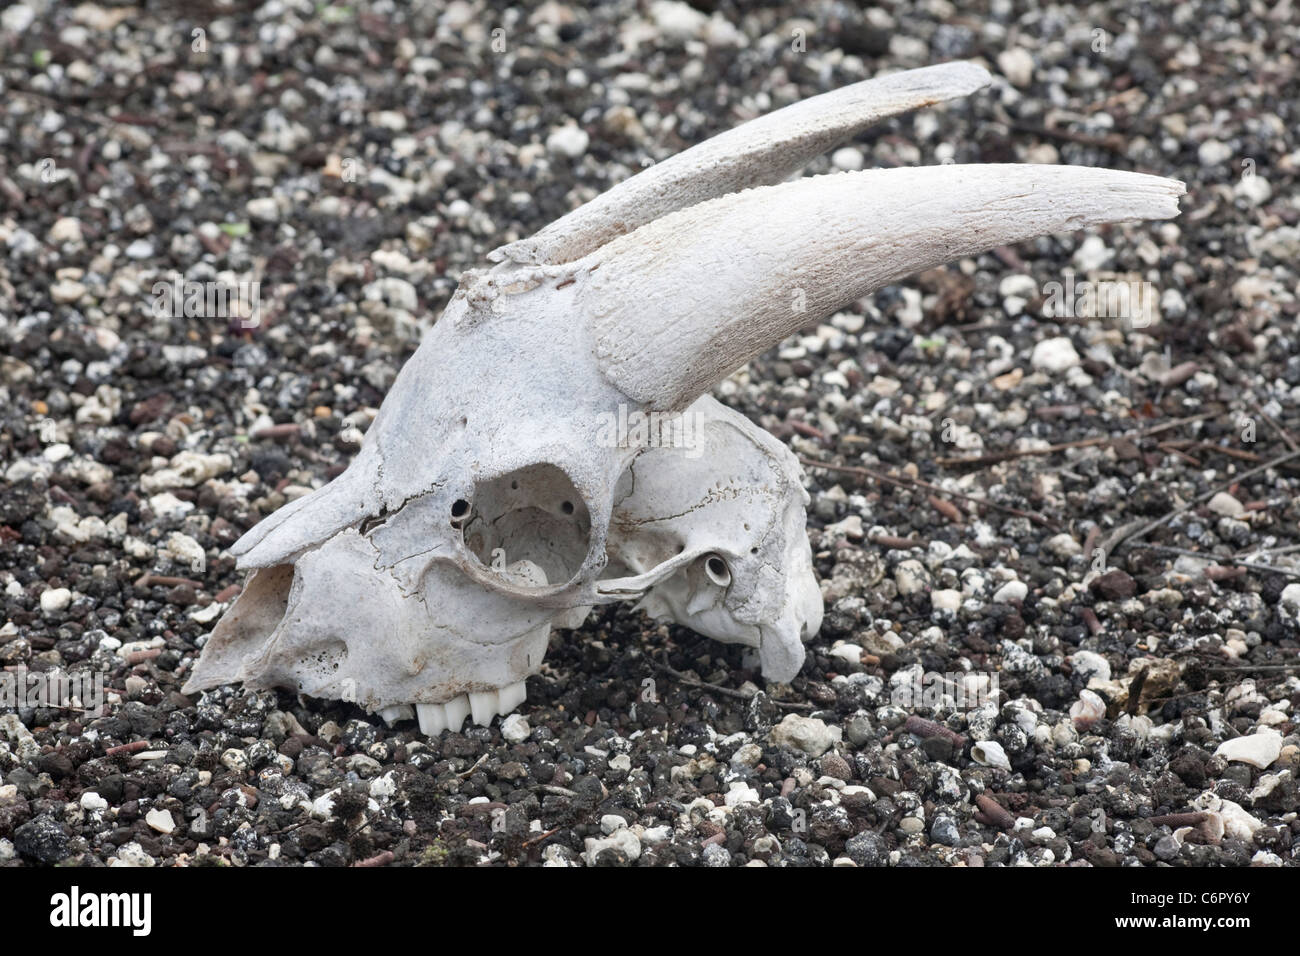 Skull of feral goat (Capra circus), an invasive species, killed during an eradication program on the island Stock Photo